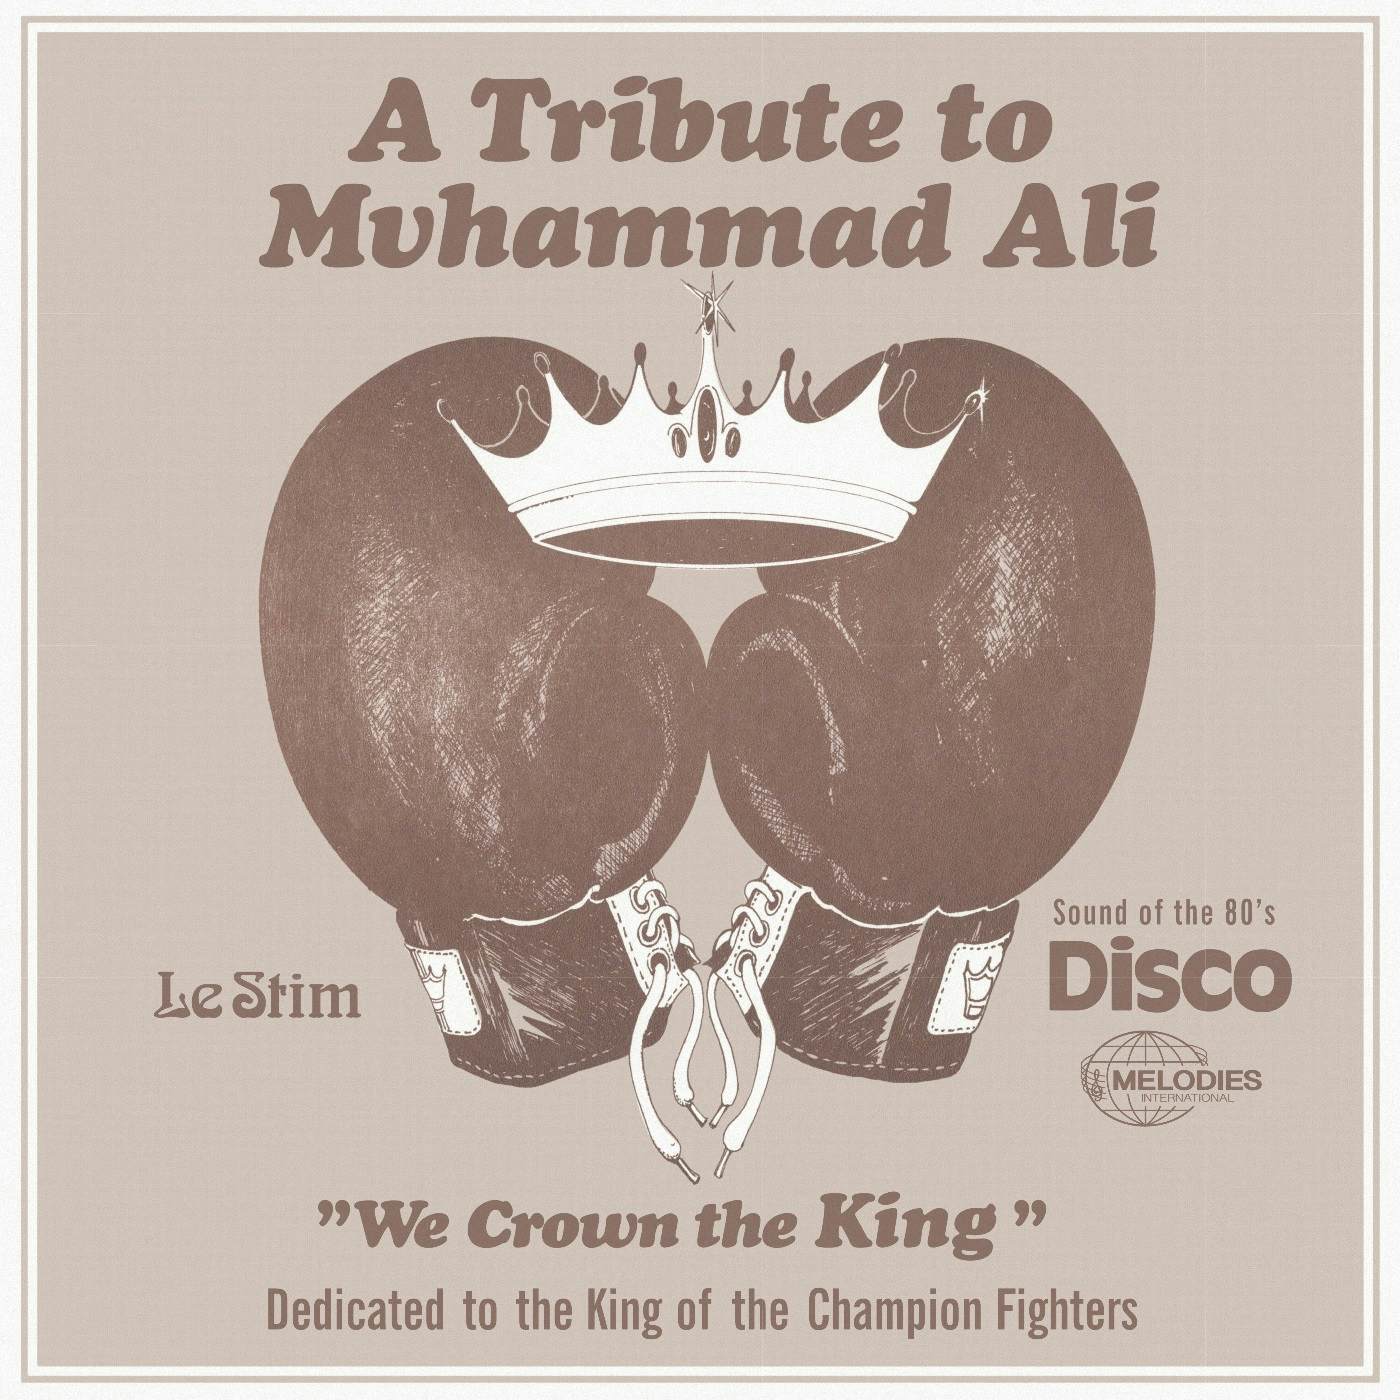 Le Stim A Tribute To Muhammad Ali (We Crown The King) Vinyl Record